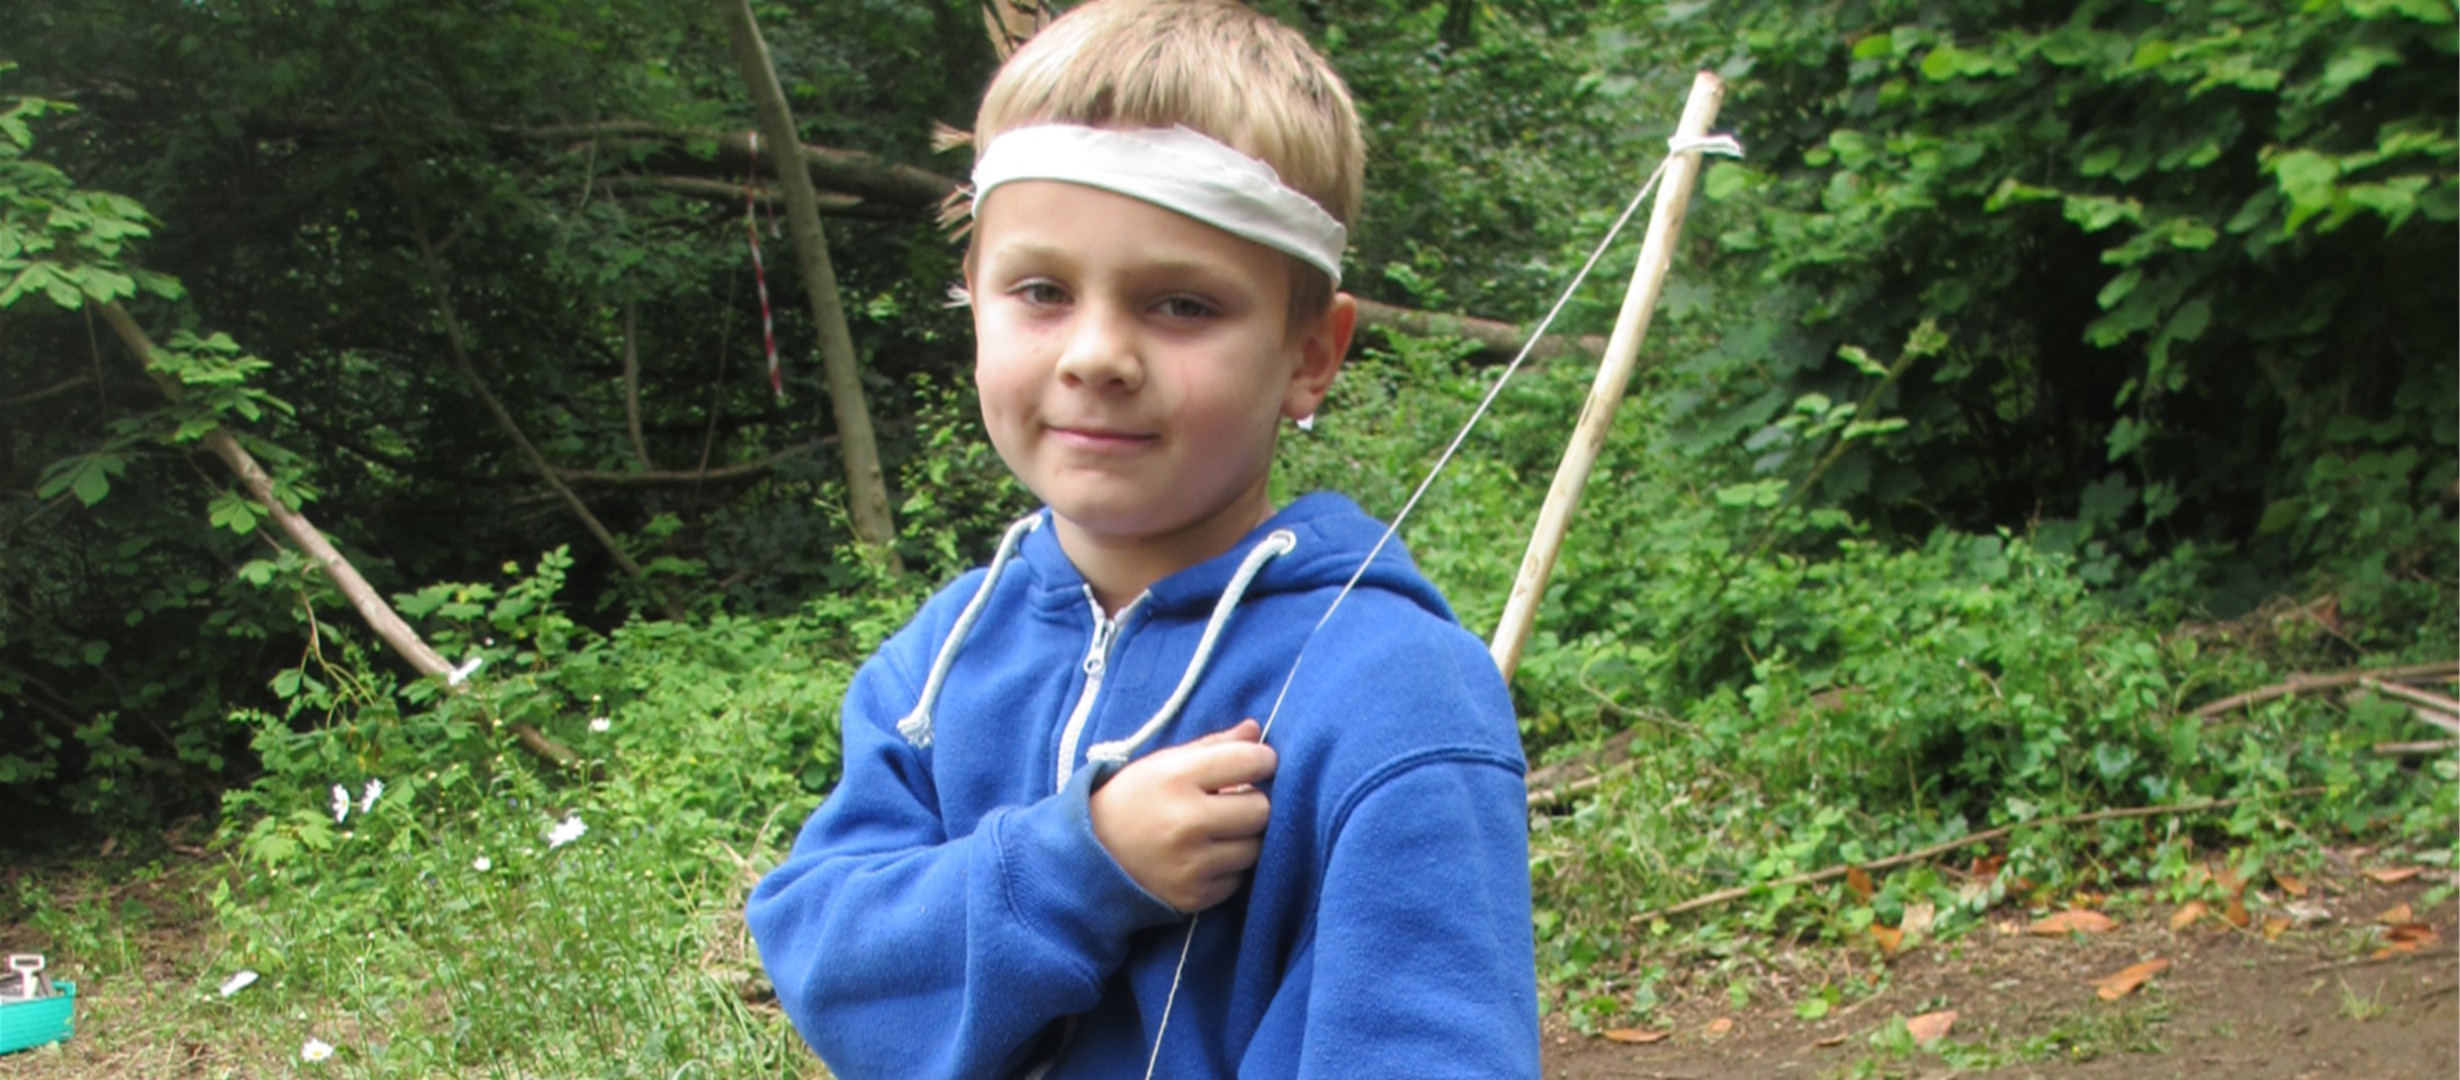 Child with short hair is stood wearing a blue hoody and white bandana holding a bow over their shoulder. Stood in a wooded clearing.